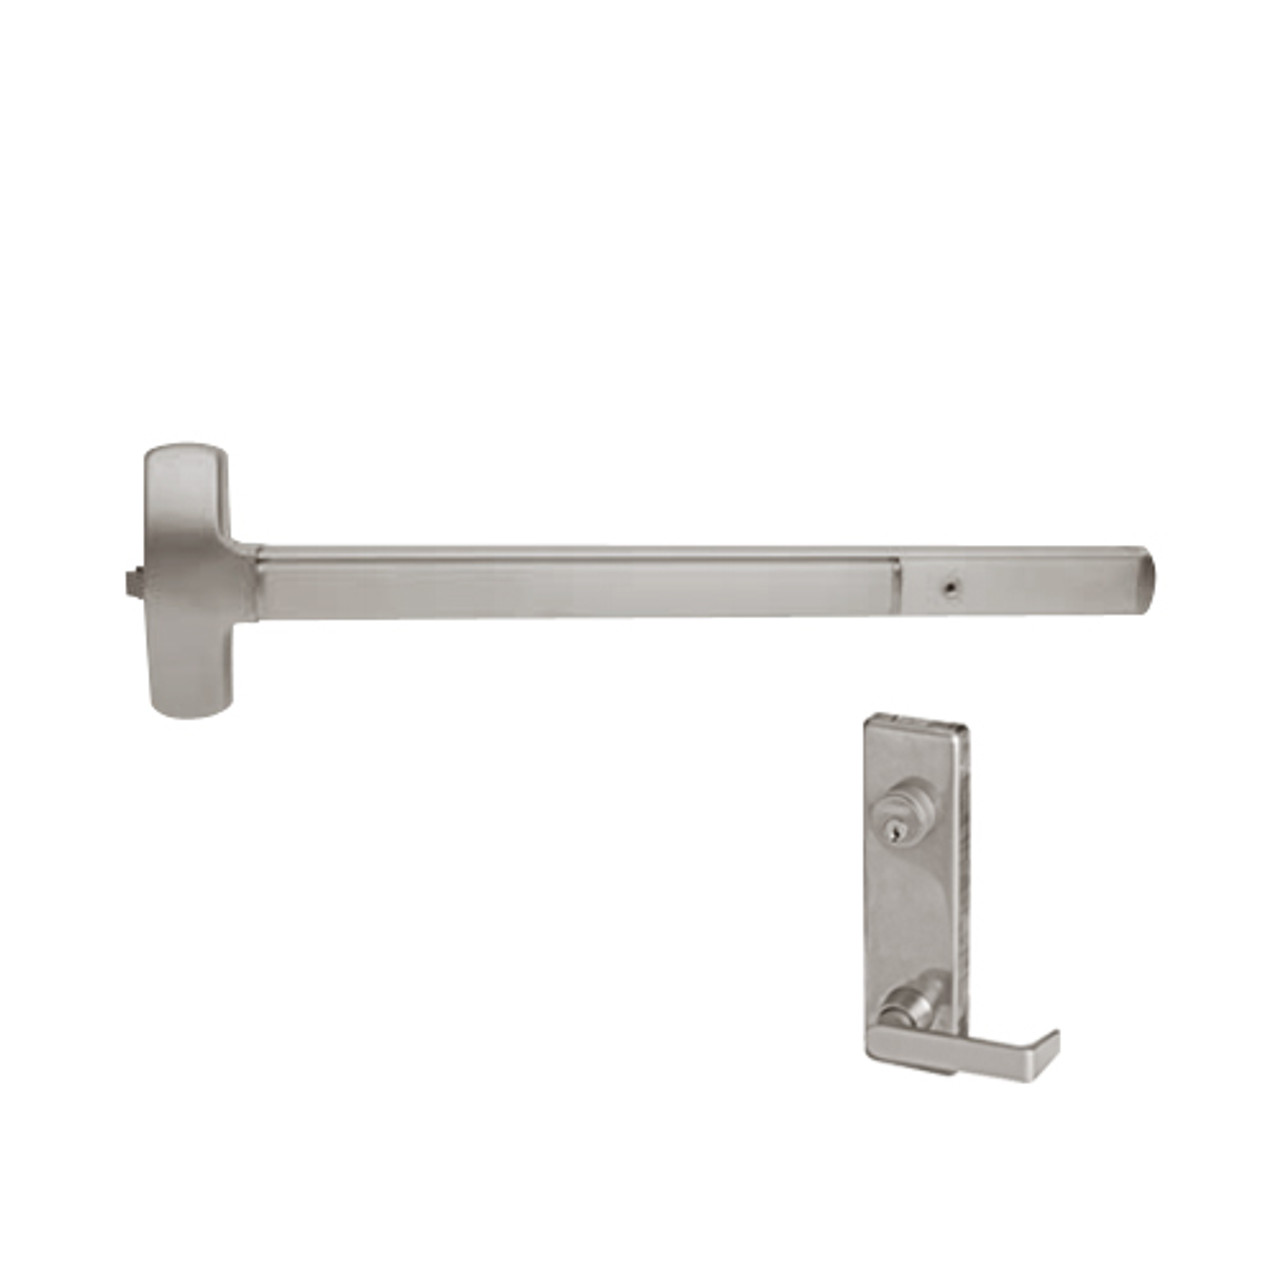 25-R-L-NL-DANE-US32D-4-RHR Falcon Exit Device in Satin Stainless Steel